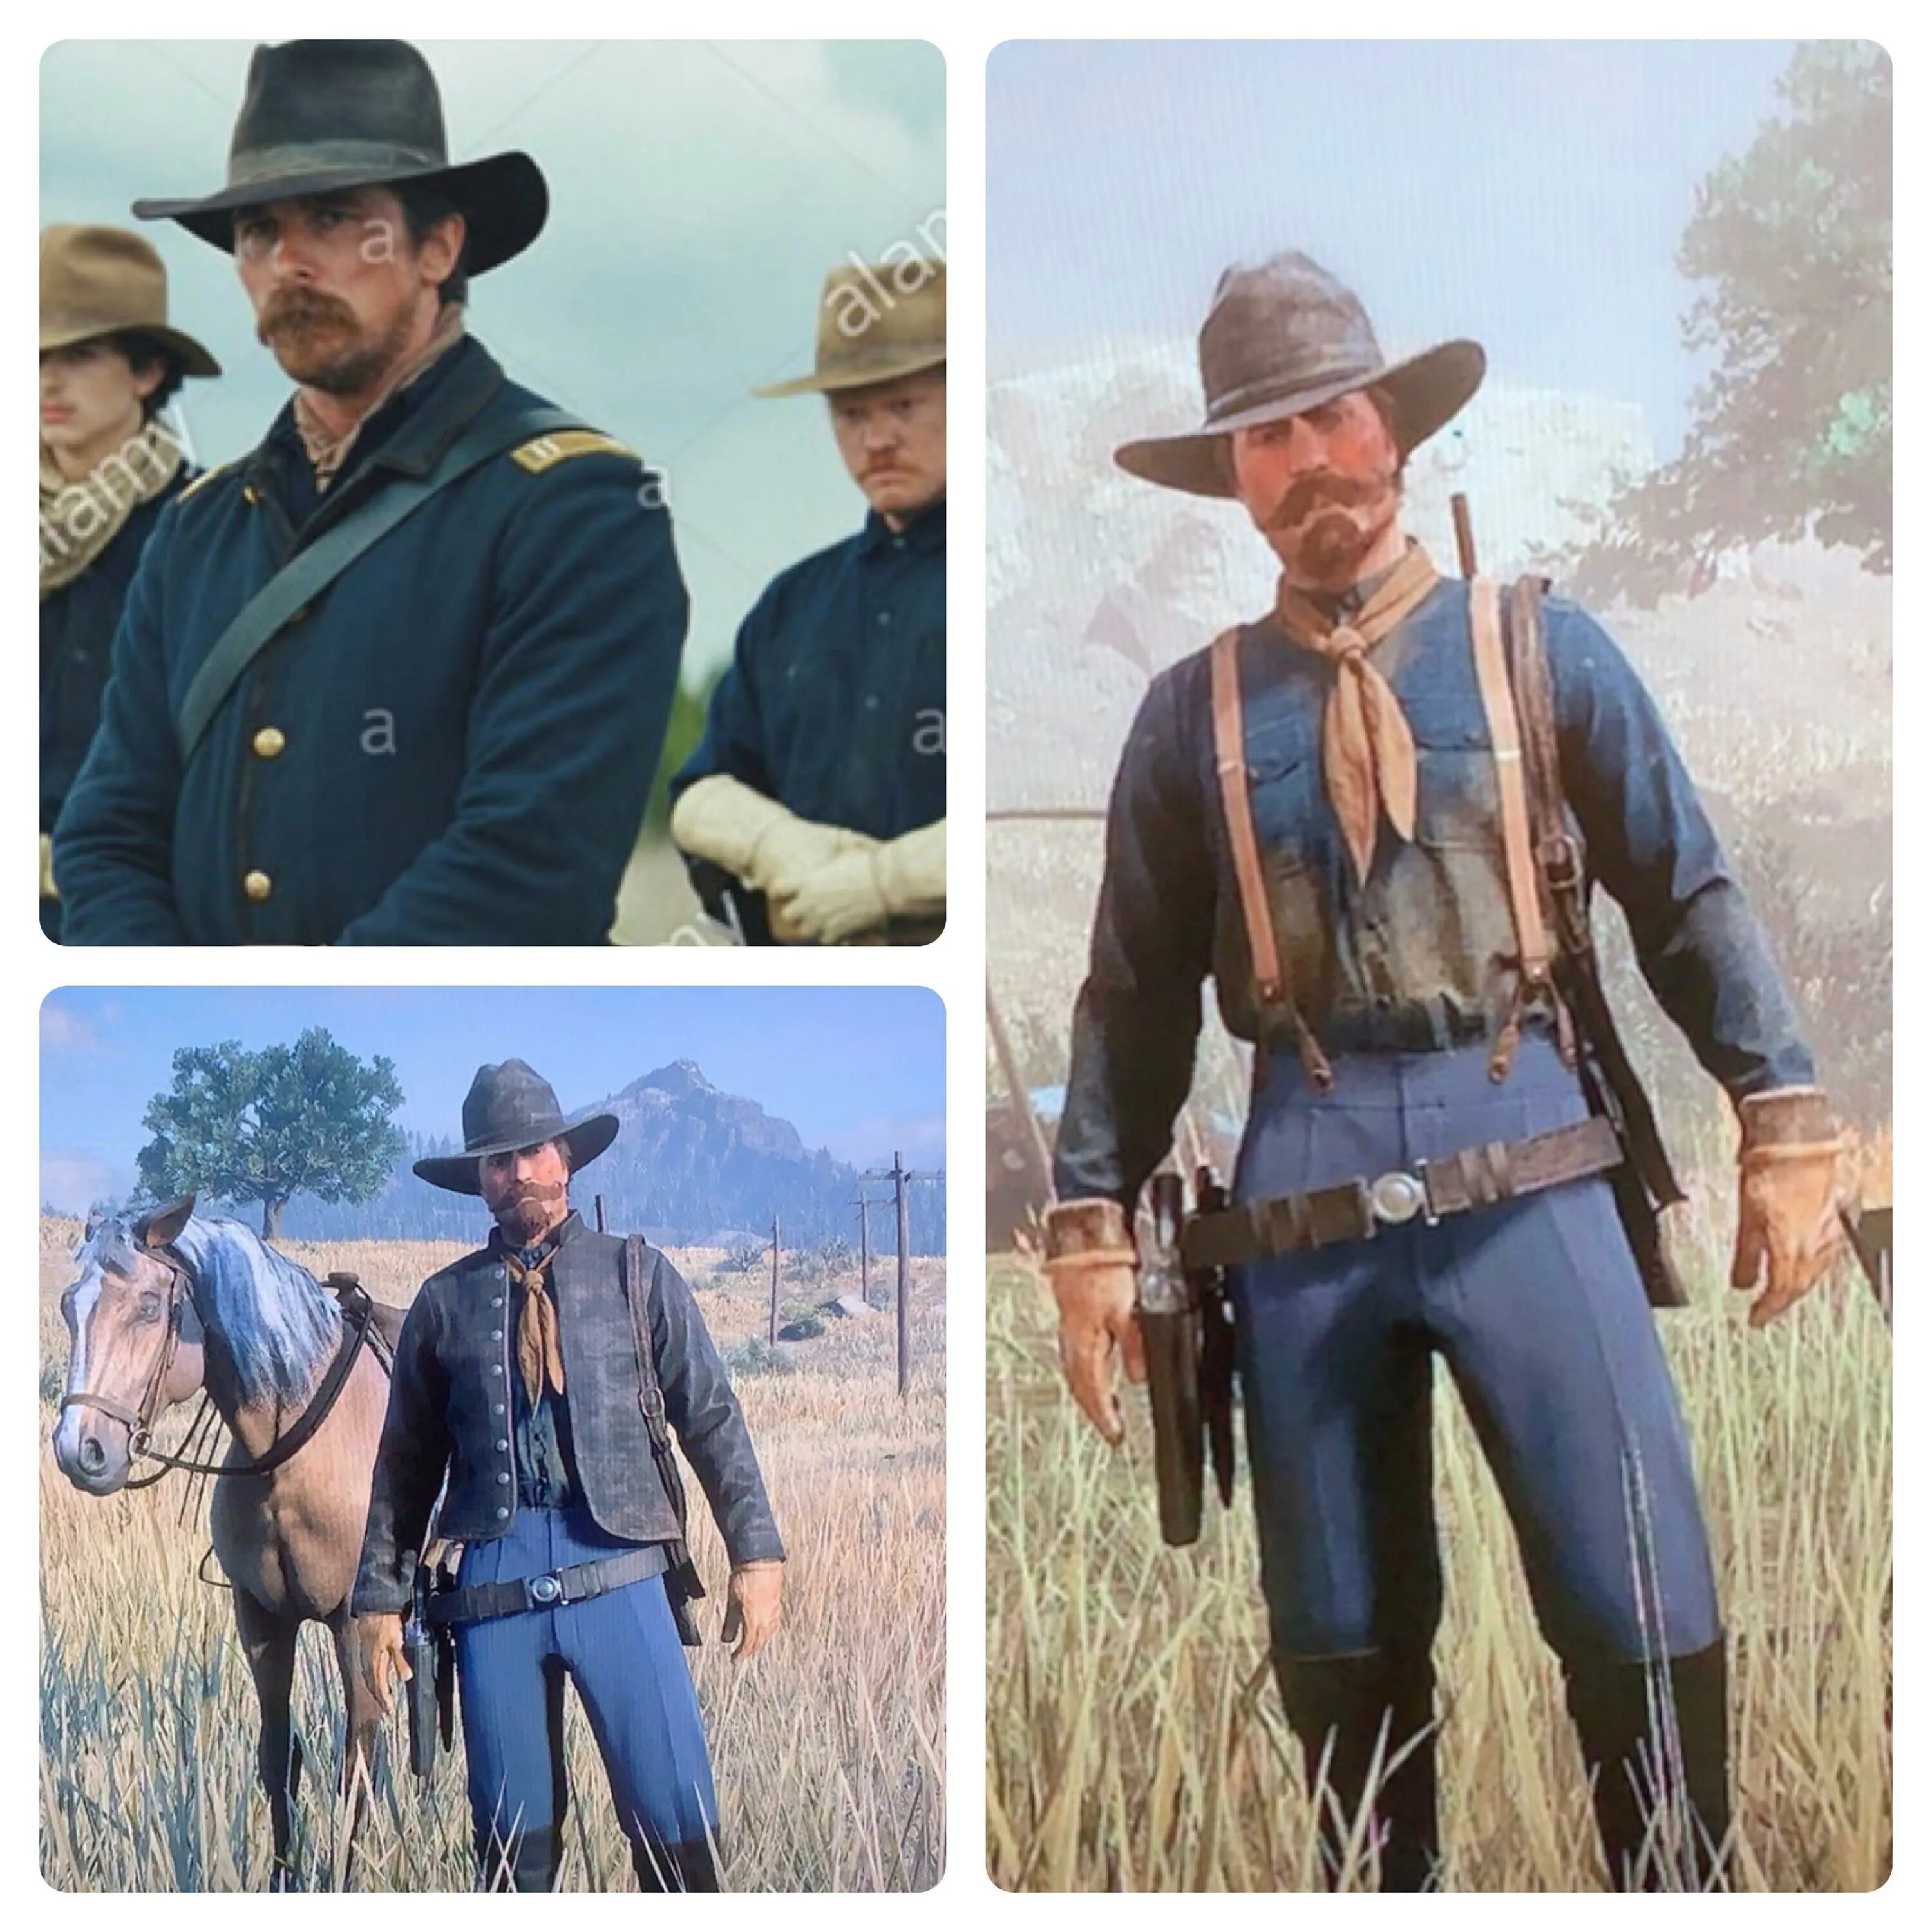 Мастер оружия рдр. Red Dead Redemption 2 Army outfit. Red Dead Redemption 2 Конфедераты. Red Dead Redemption 2 кавалерист. Red Dead Redemption 2 армия.